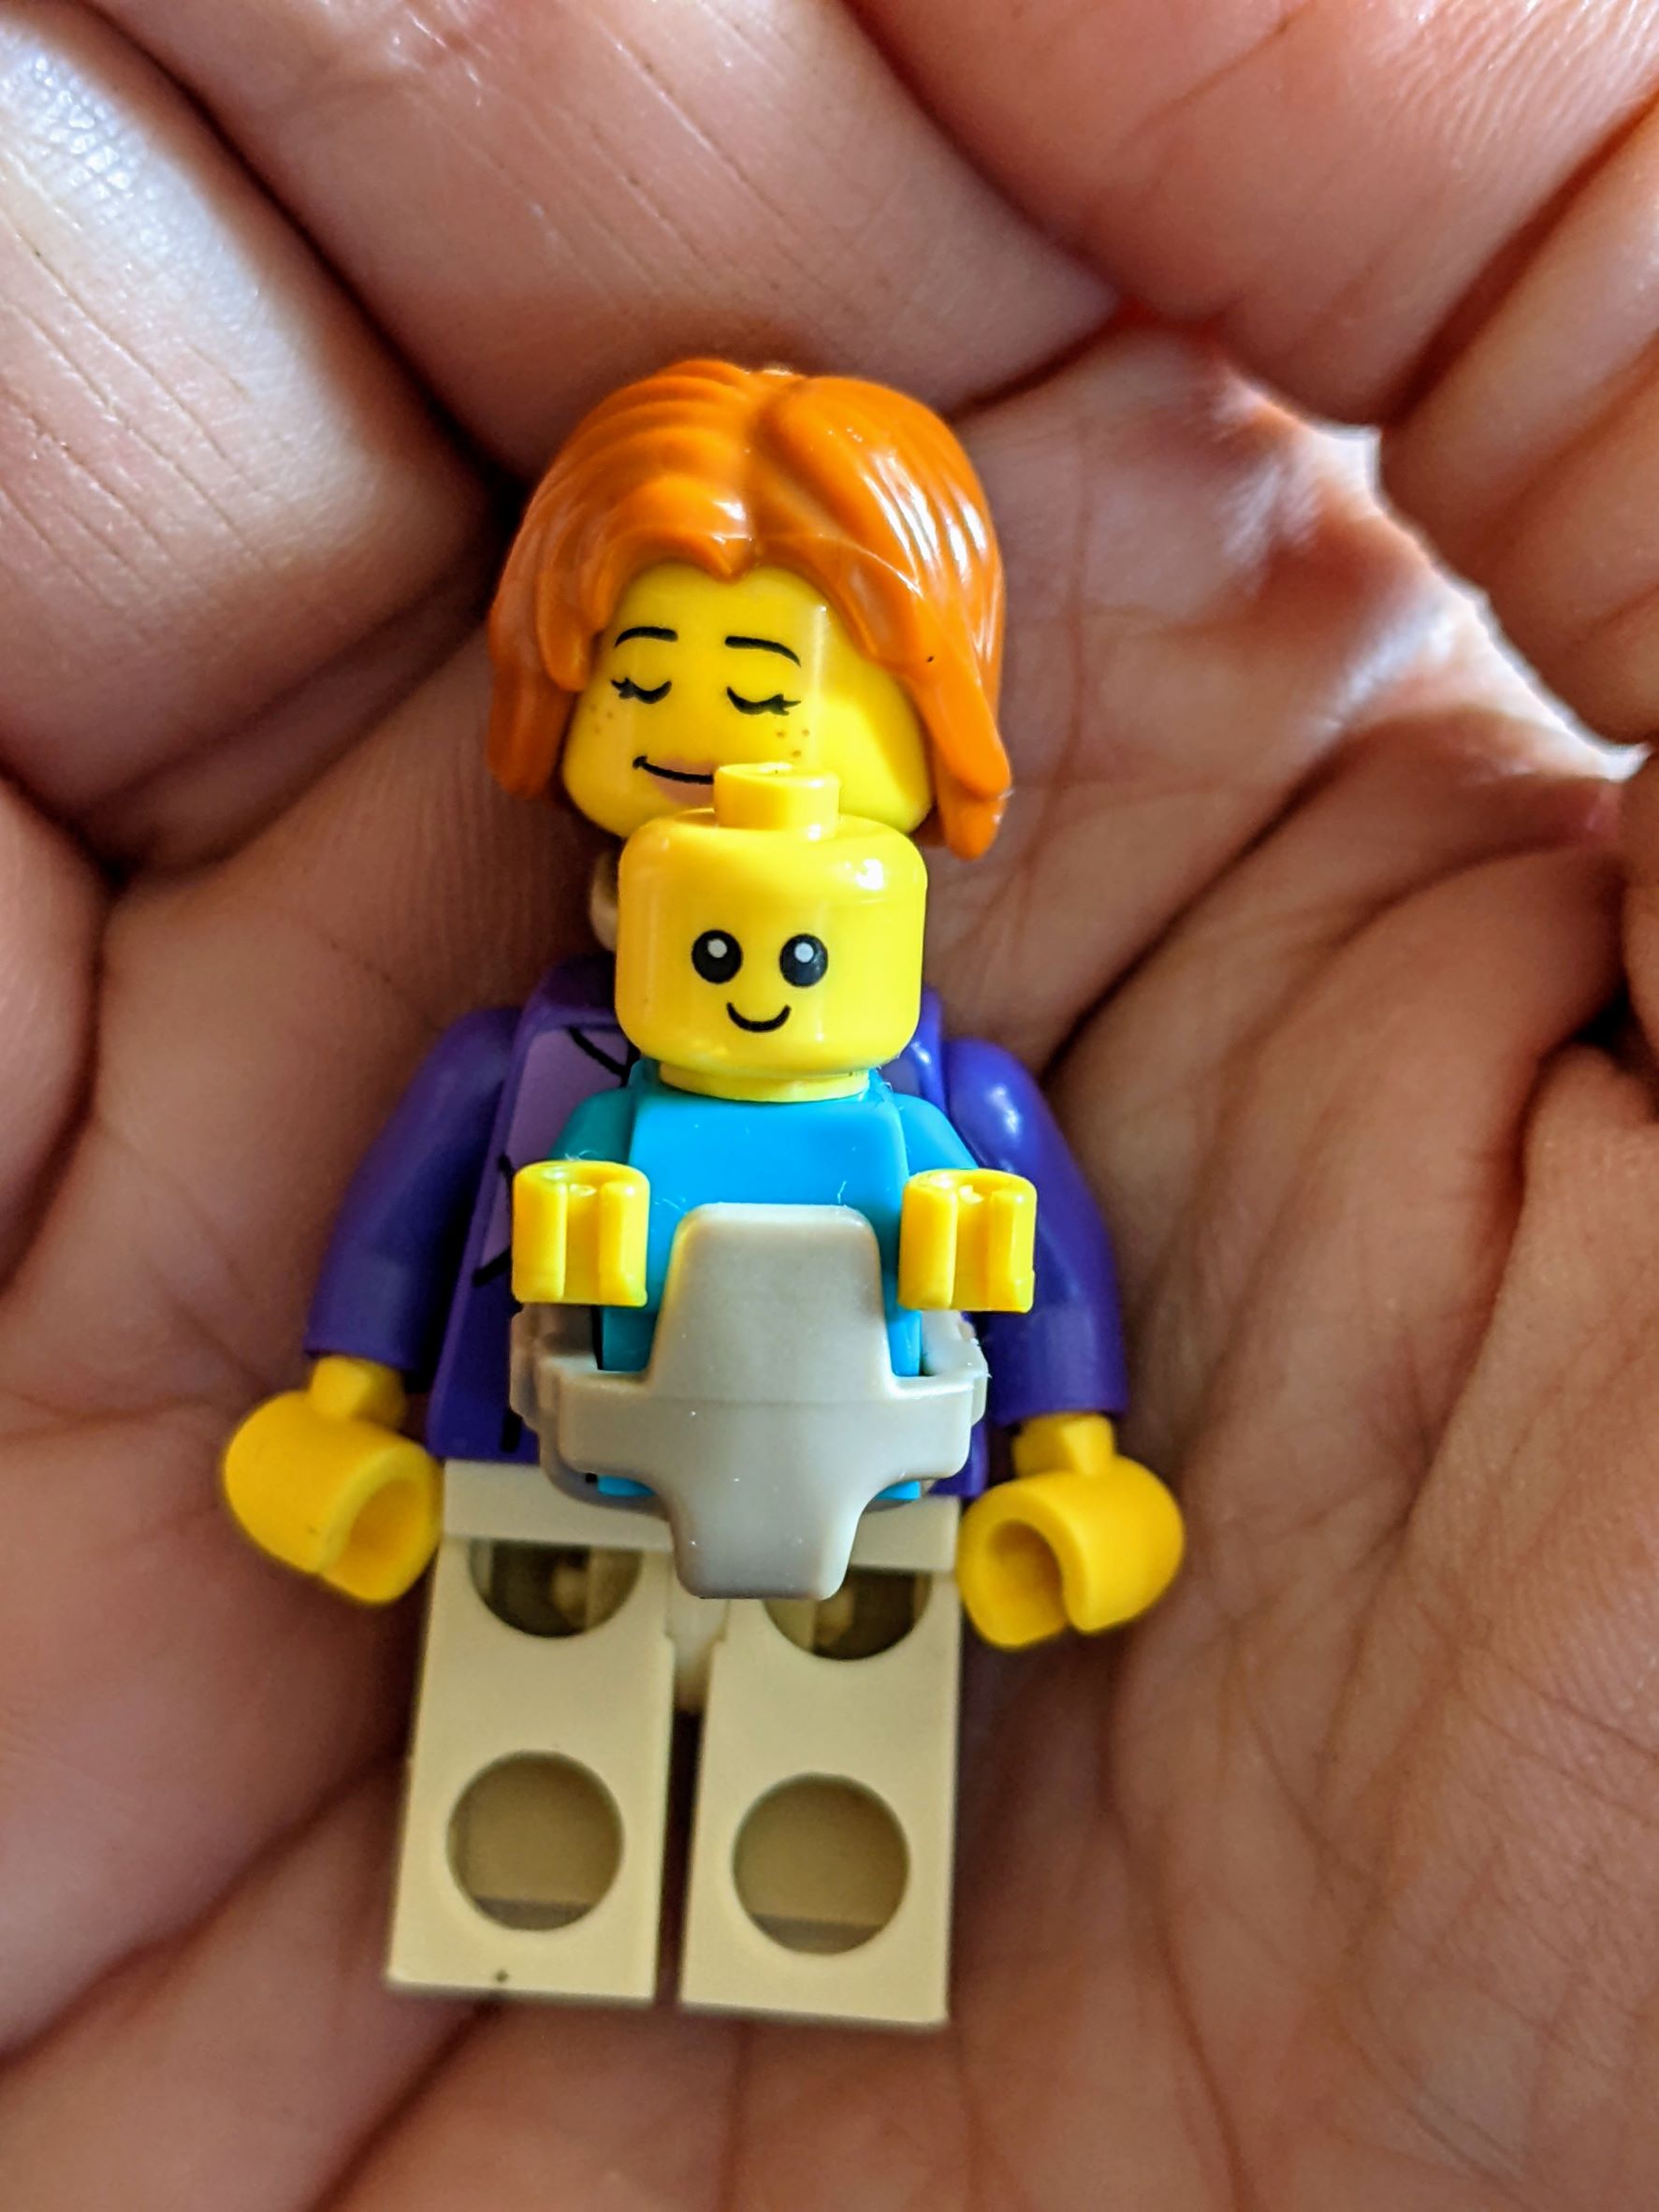 Baby and mother lego